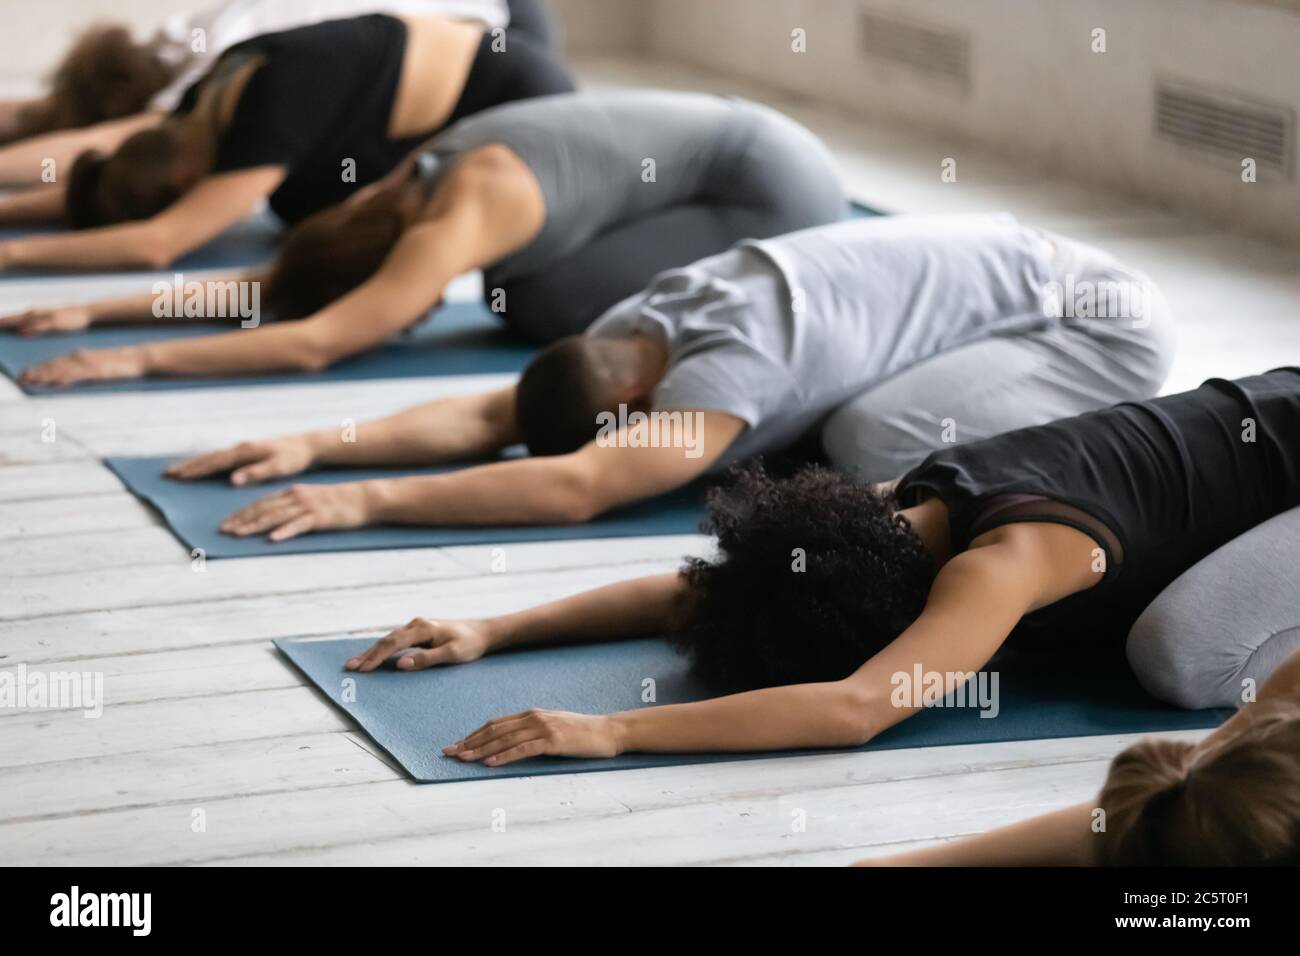 Young diverse people relaxing on floor mat in child pose. Stock Photo